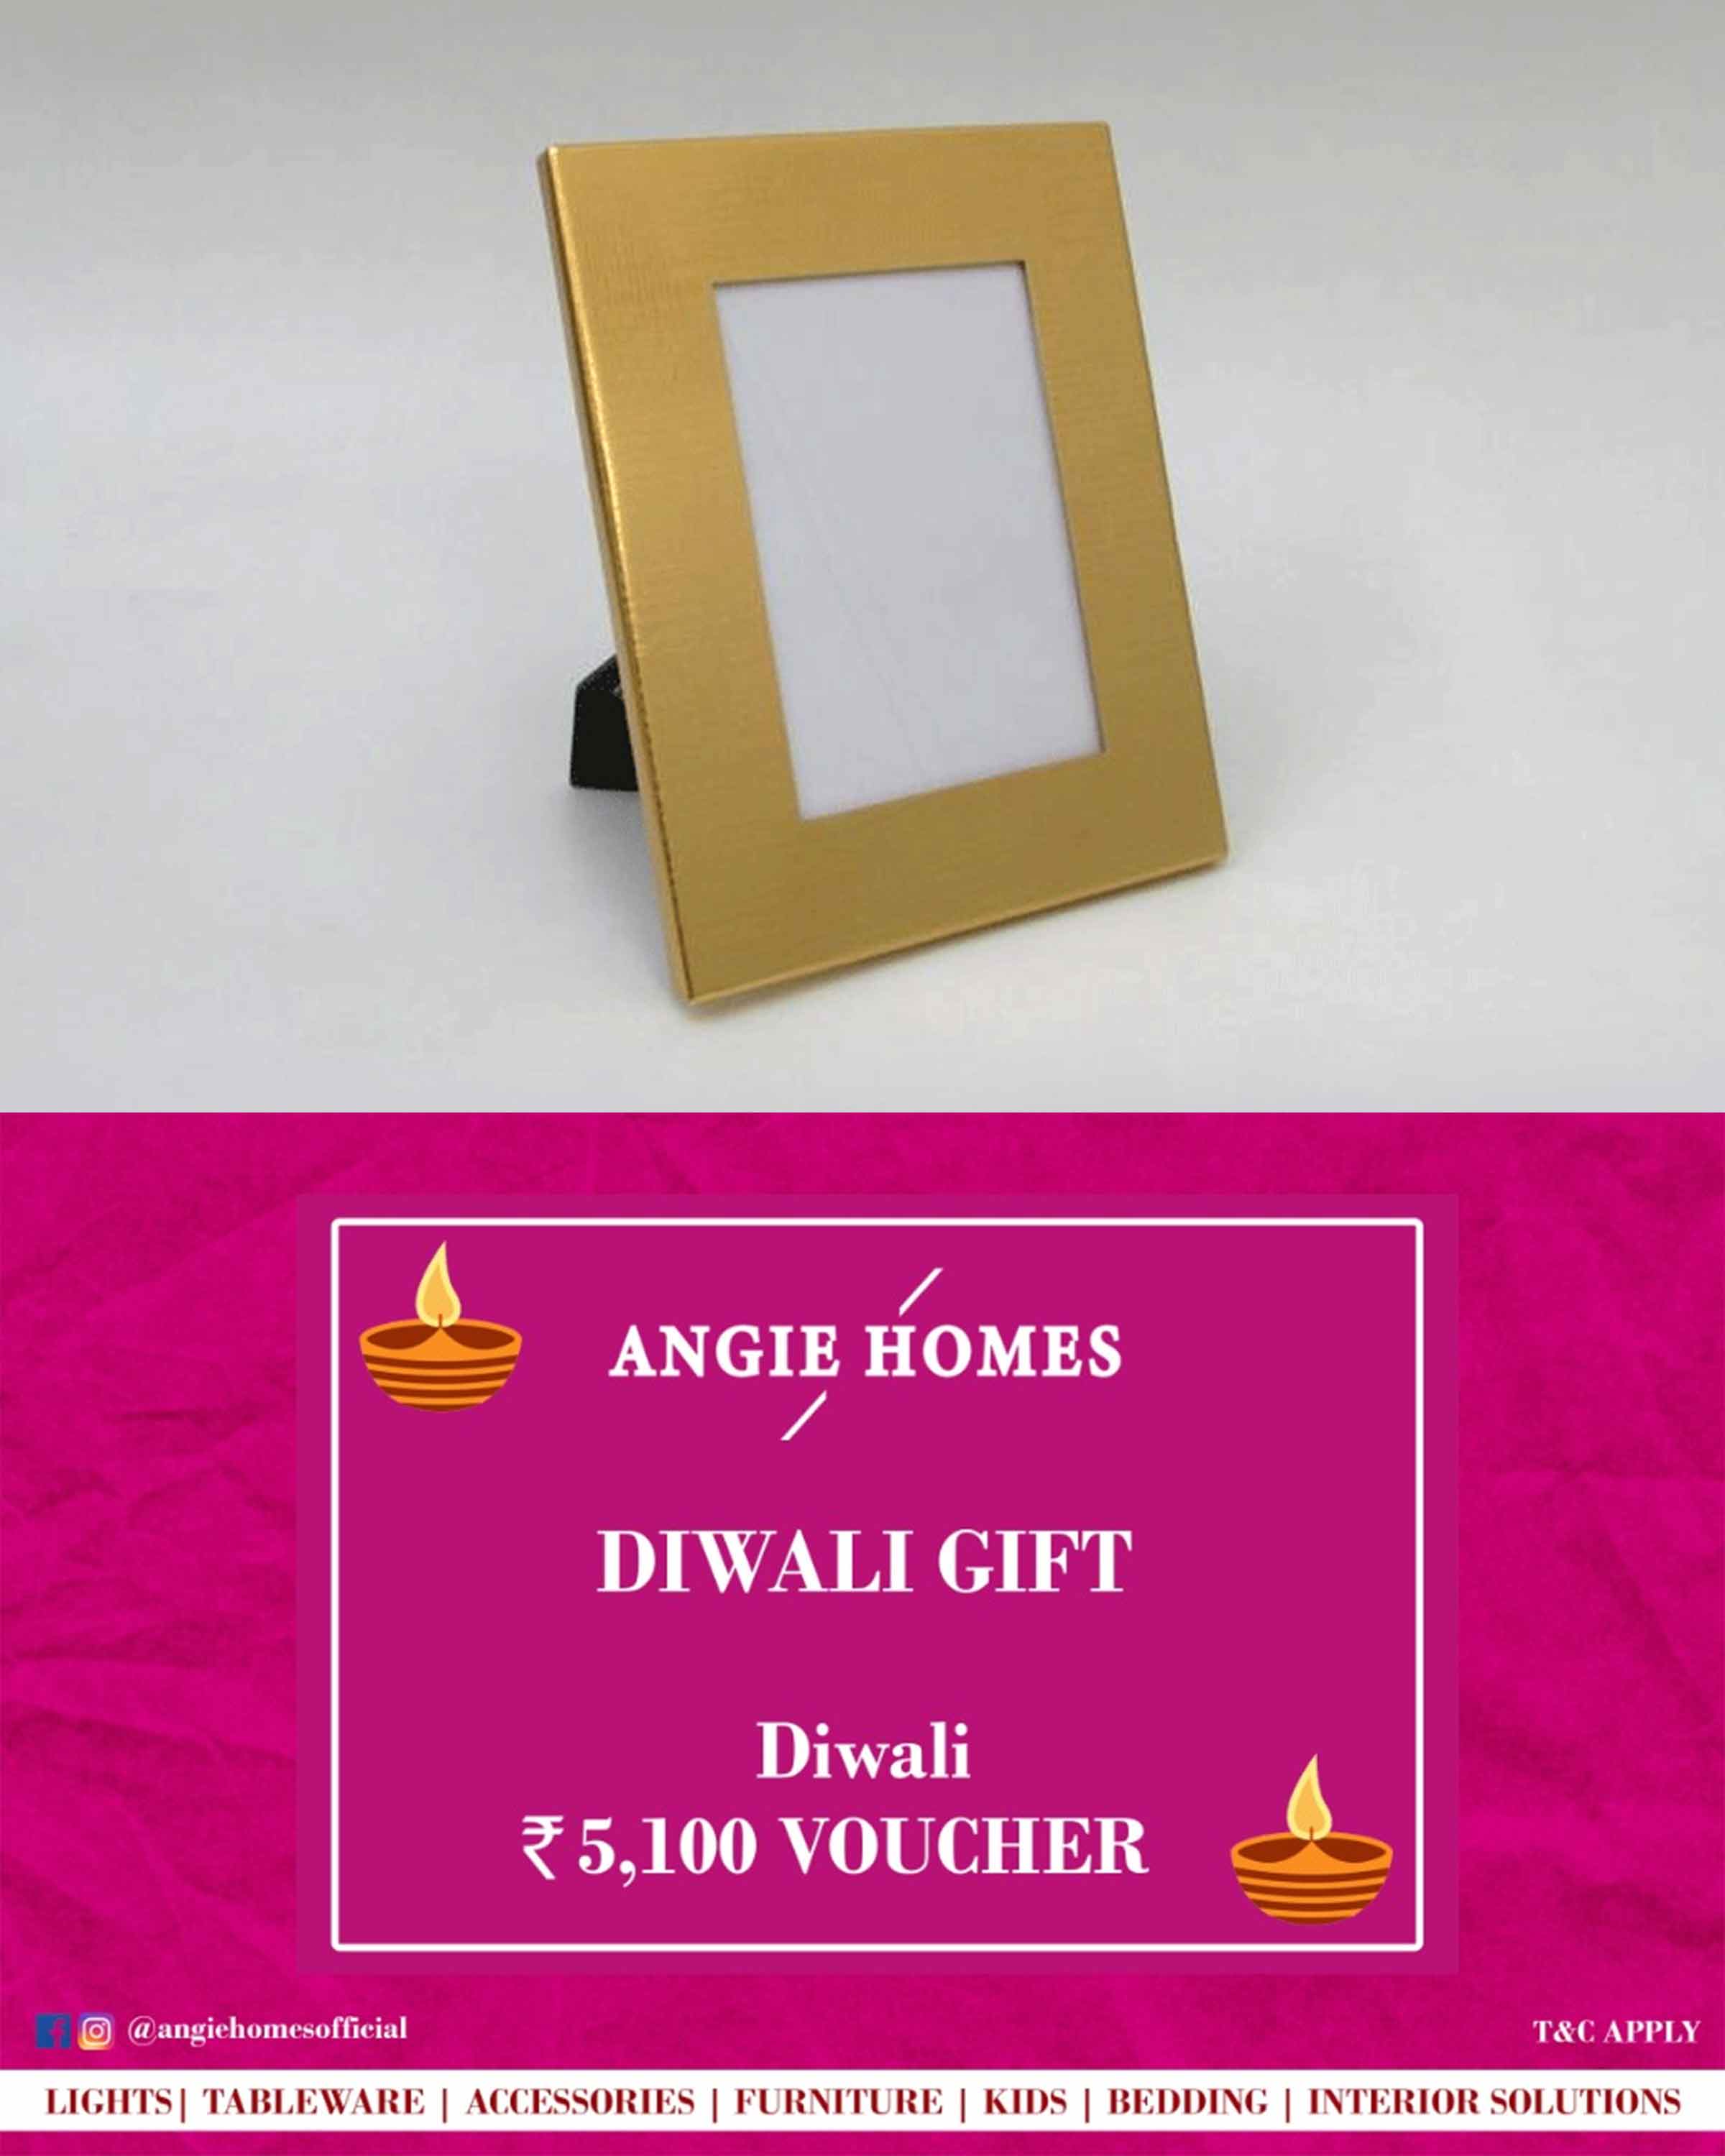 Online Diwali Gift Card Voucher for Gold Finish Photo Frame | Accessories ANGIE HOMES